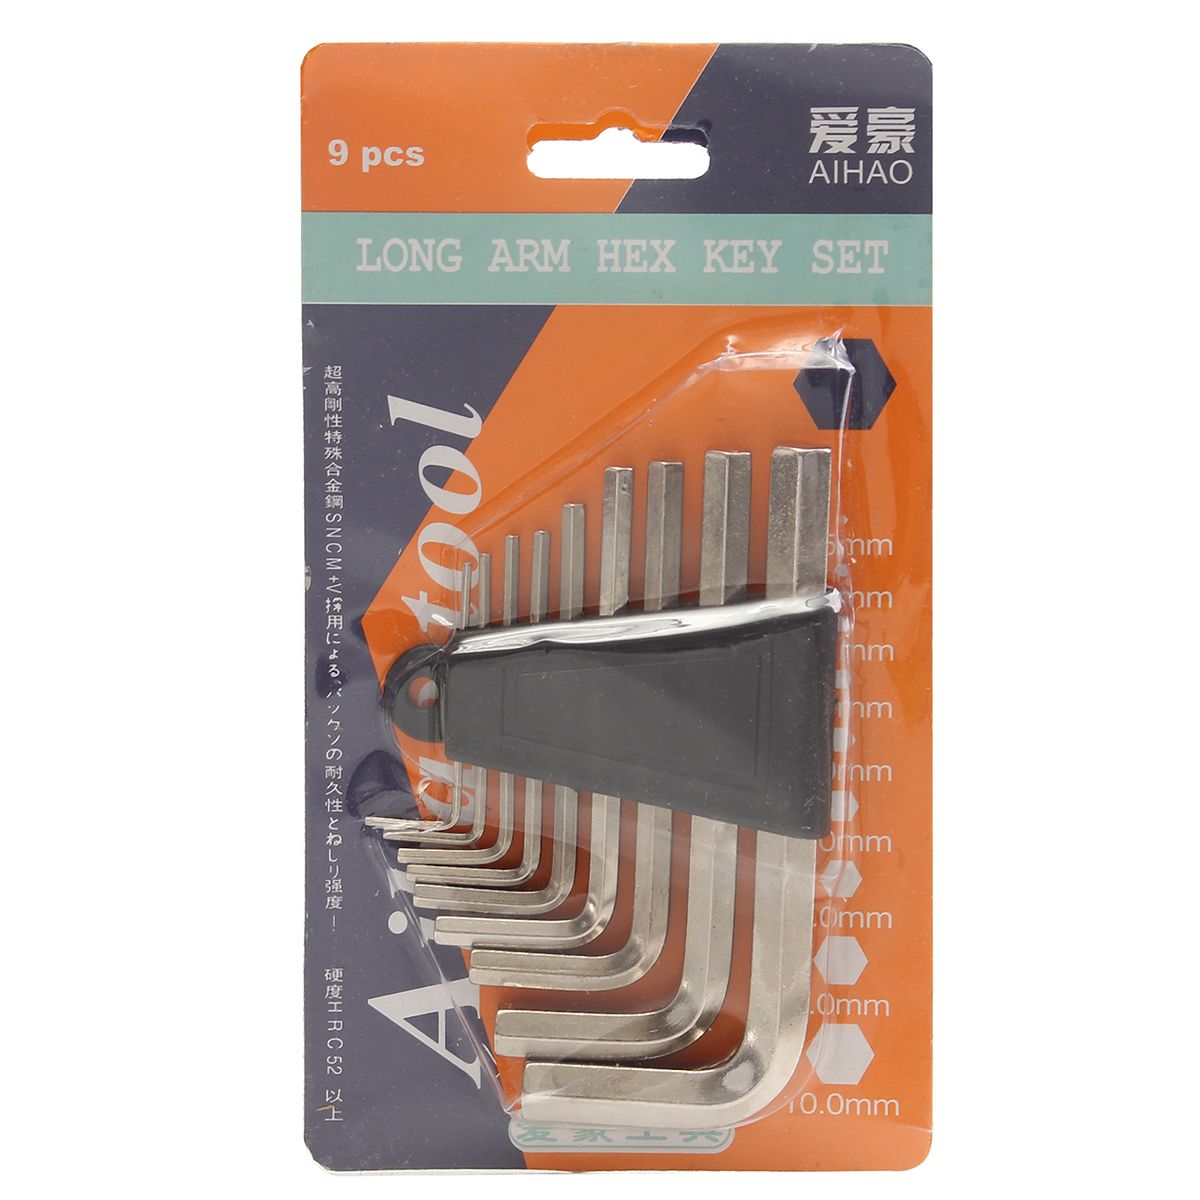 8Pcs-Metric-Combination-Hex-Key-Allen-Wrench-Set-15mm-to-10mm-Key-Hand-Tool-1128964